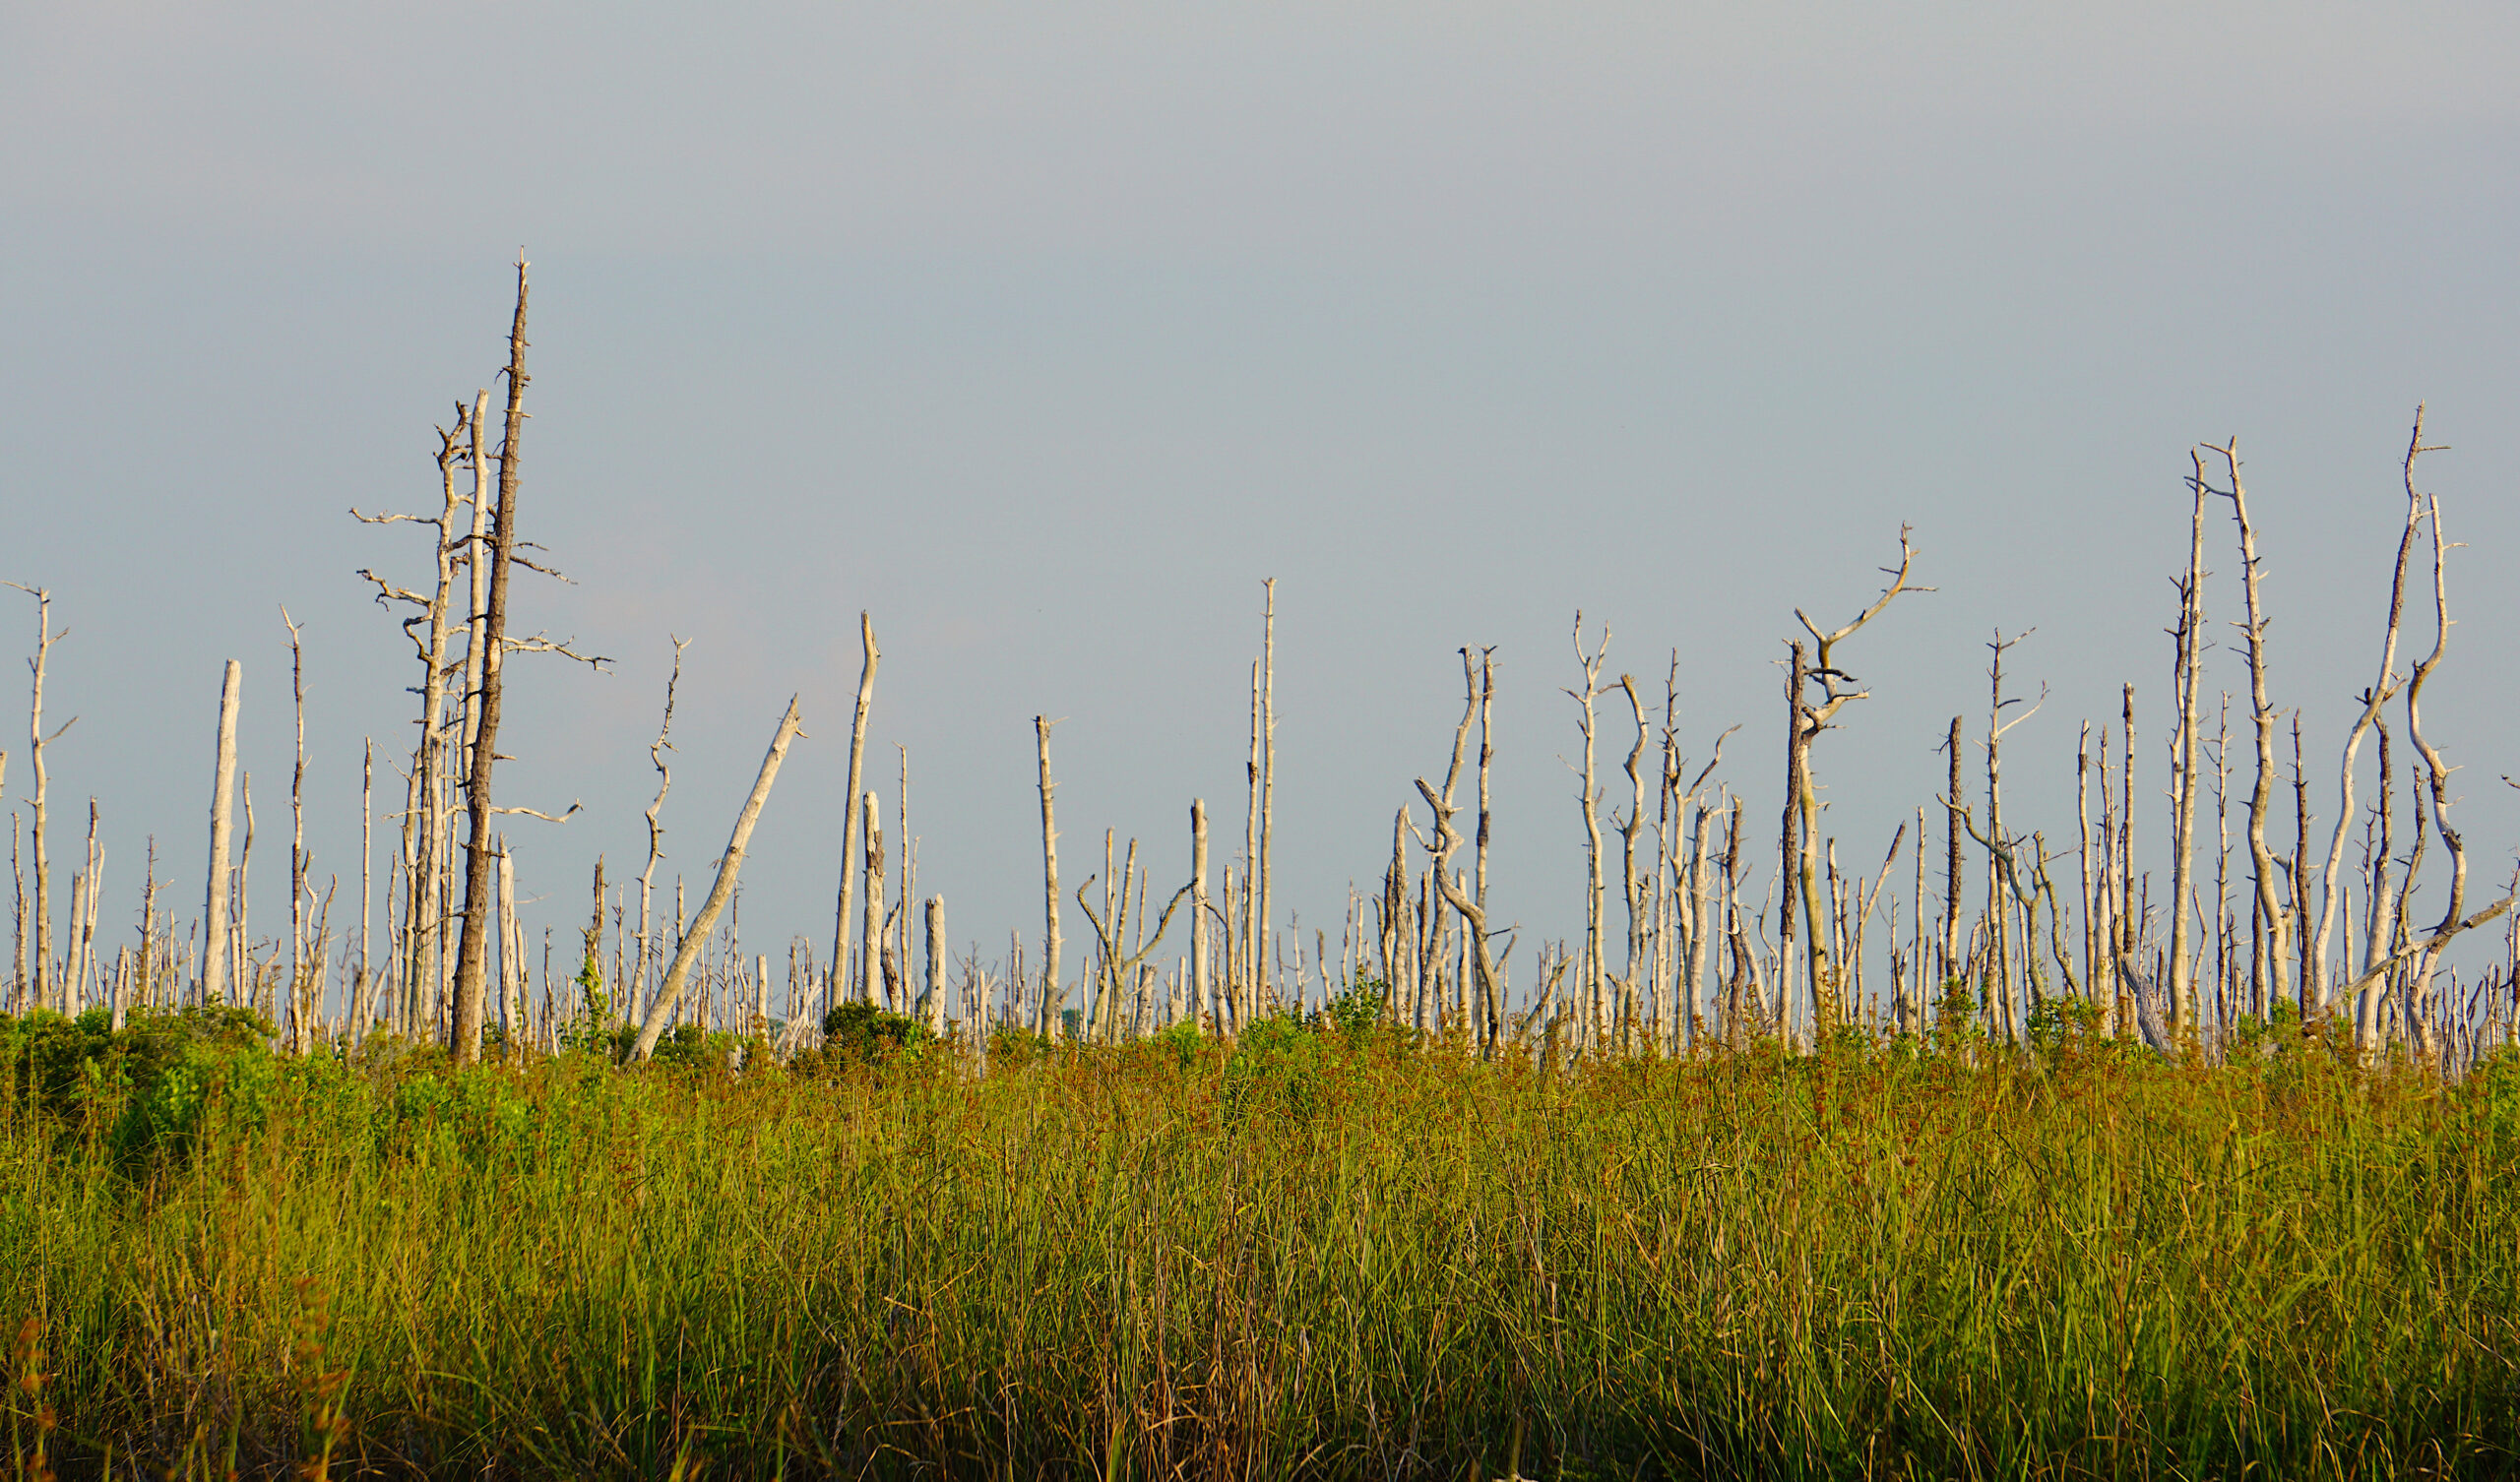 Bare tree trunks jutting from a marsh, known as a ghost forest